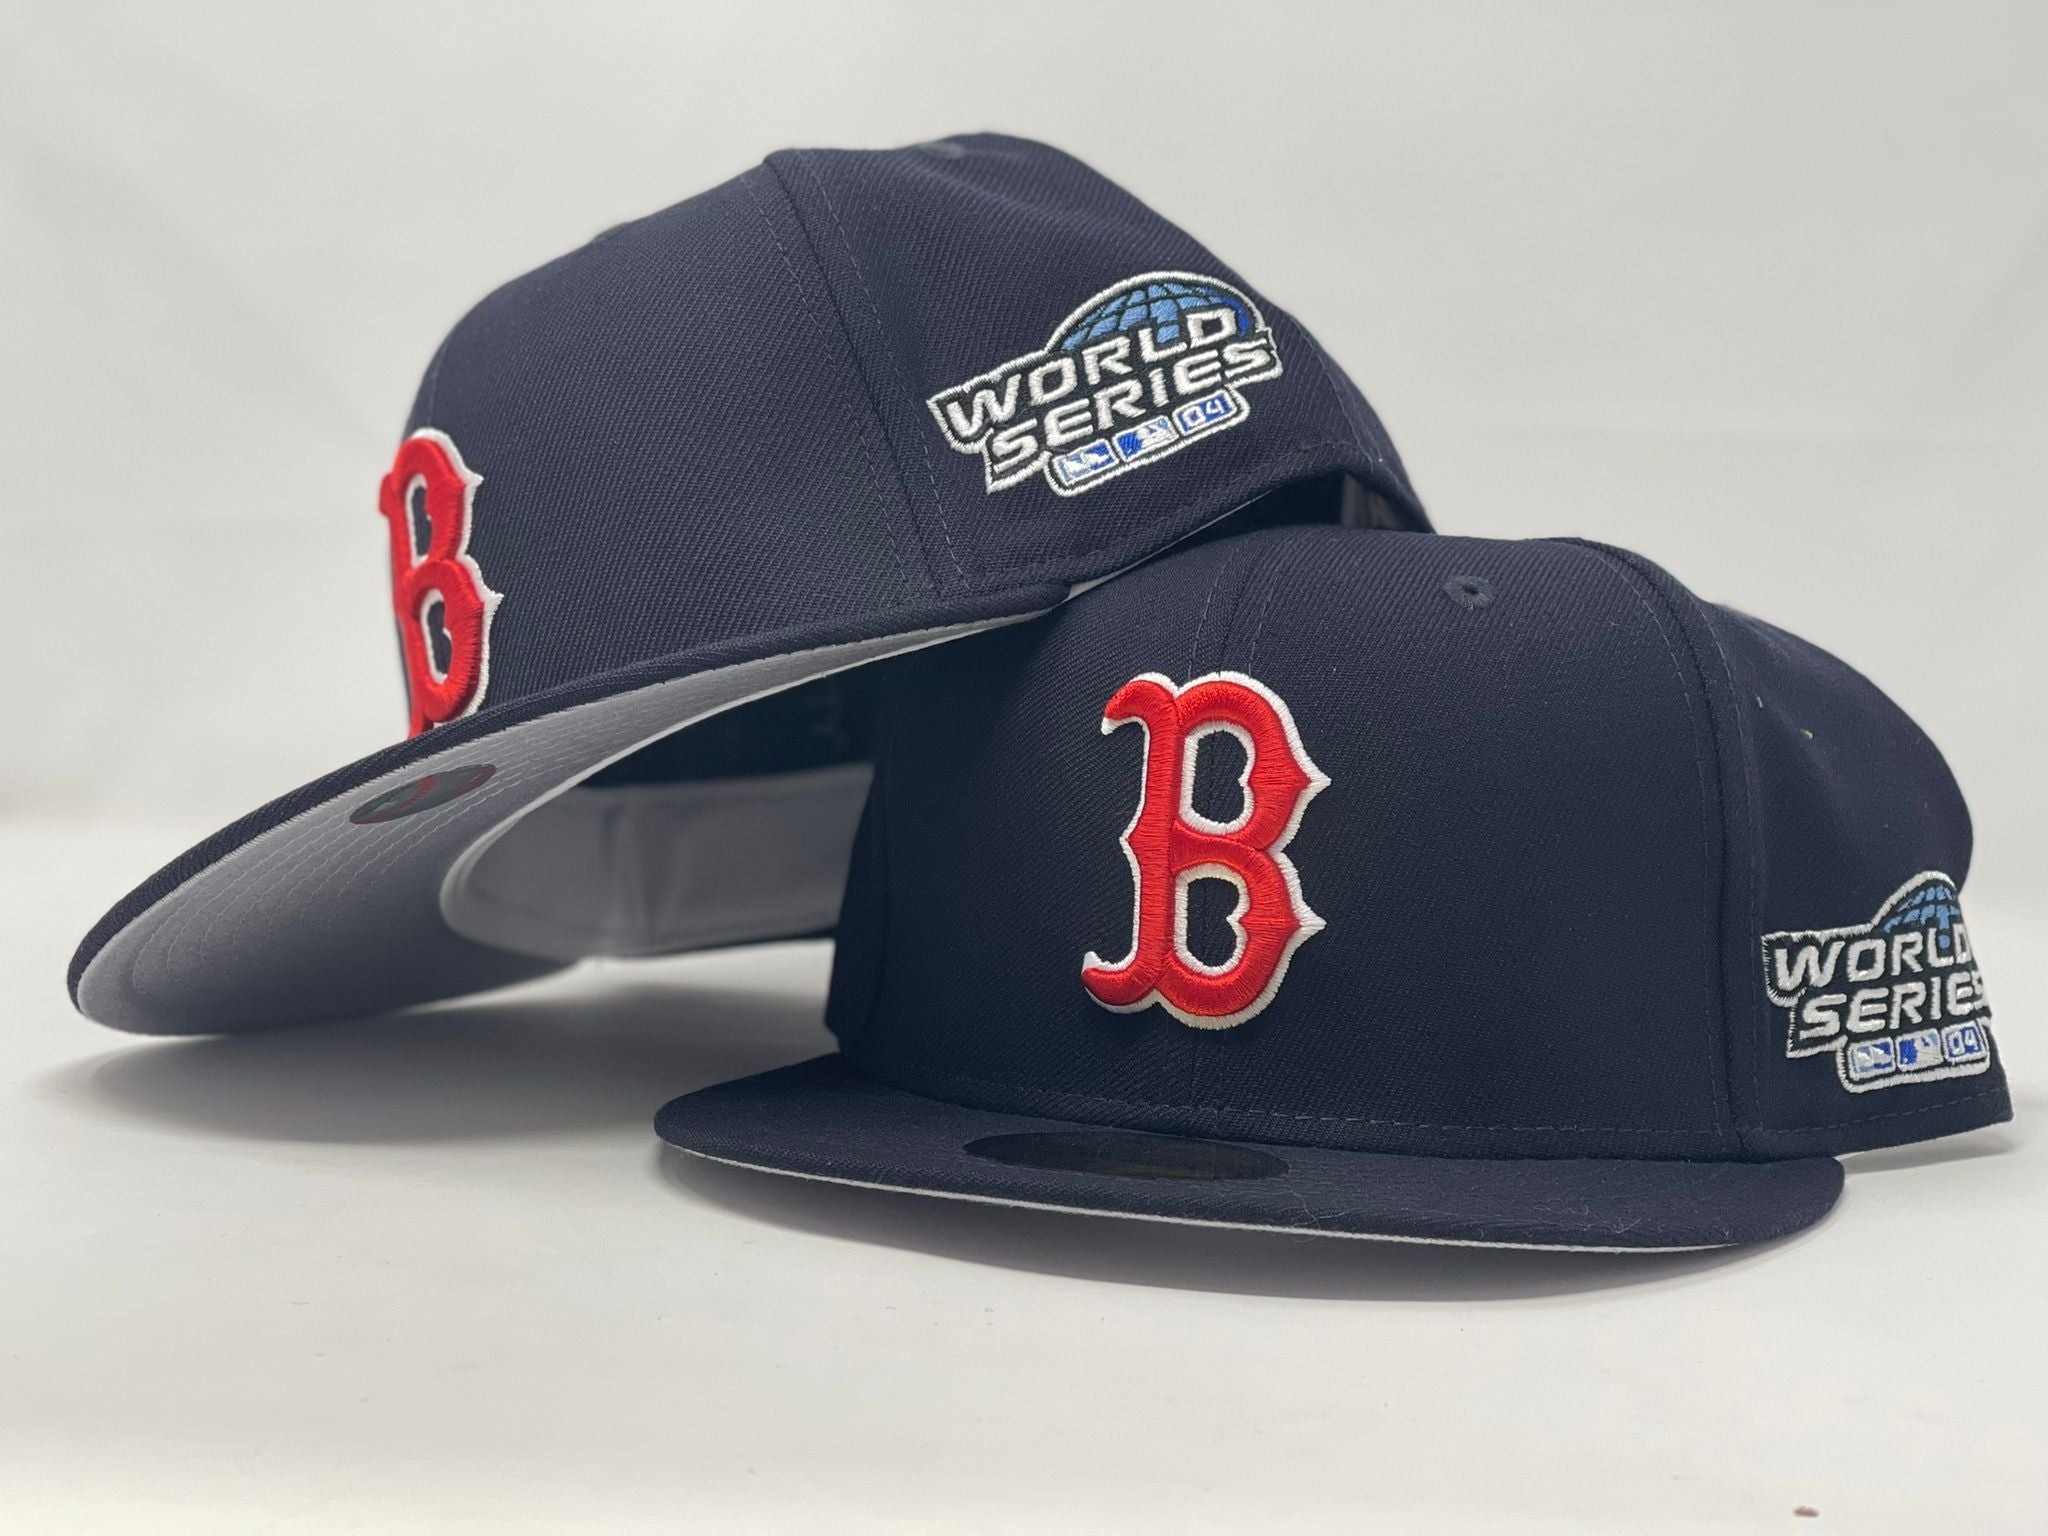 New Era Mens MLB Boston Red Sox World Series 2004 59FIFTY Fitted Hat 70776326 Navy/Scarlet, Grey Undervisor 7 1/8